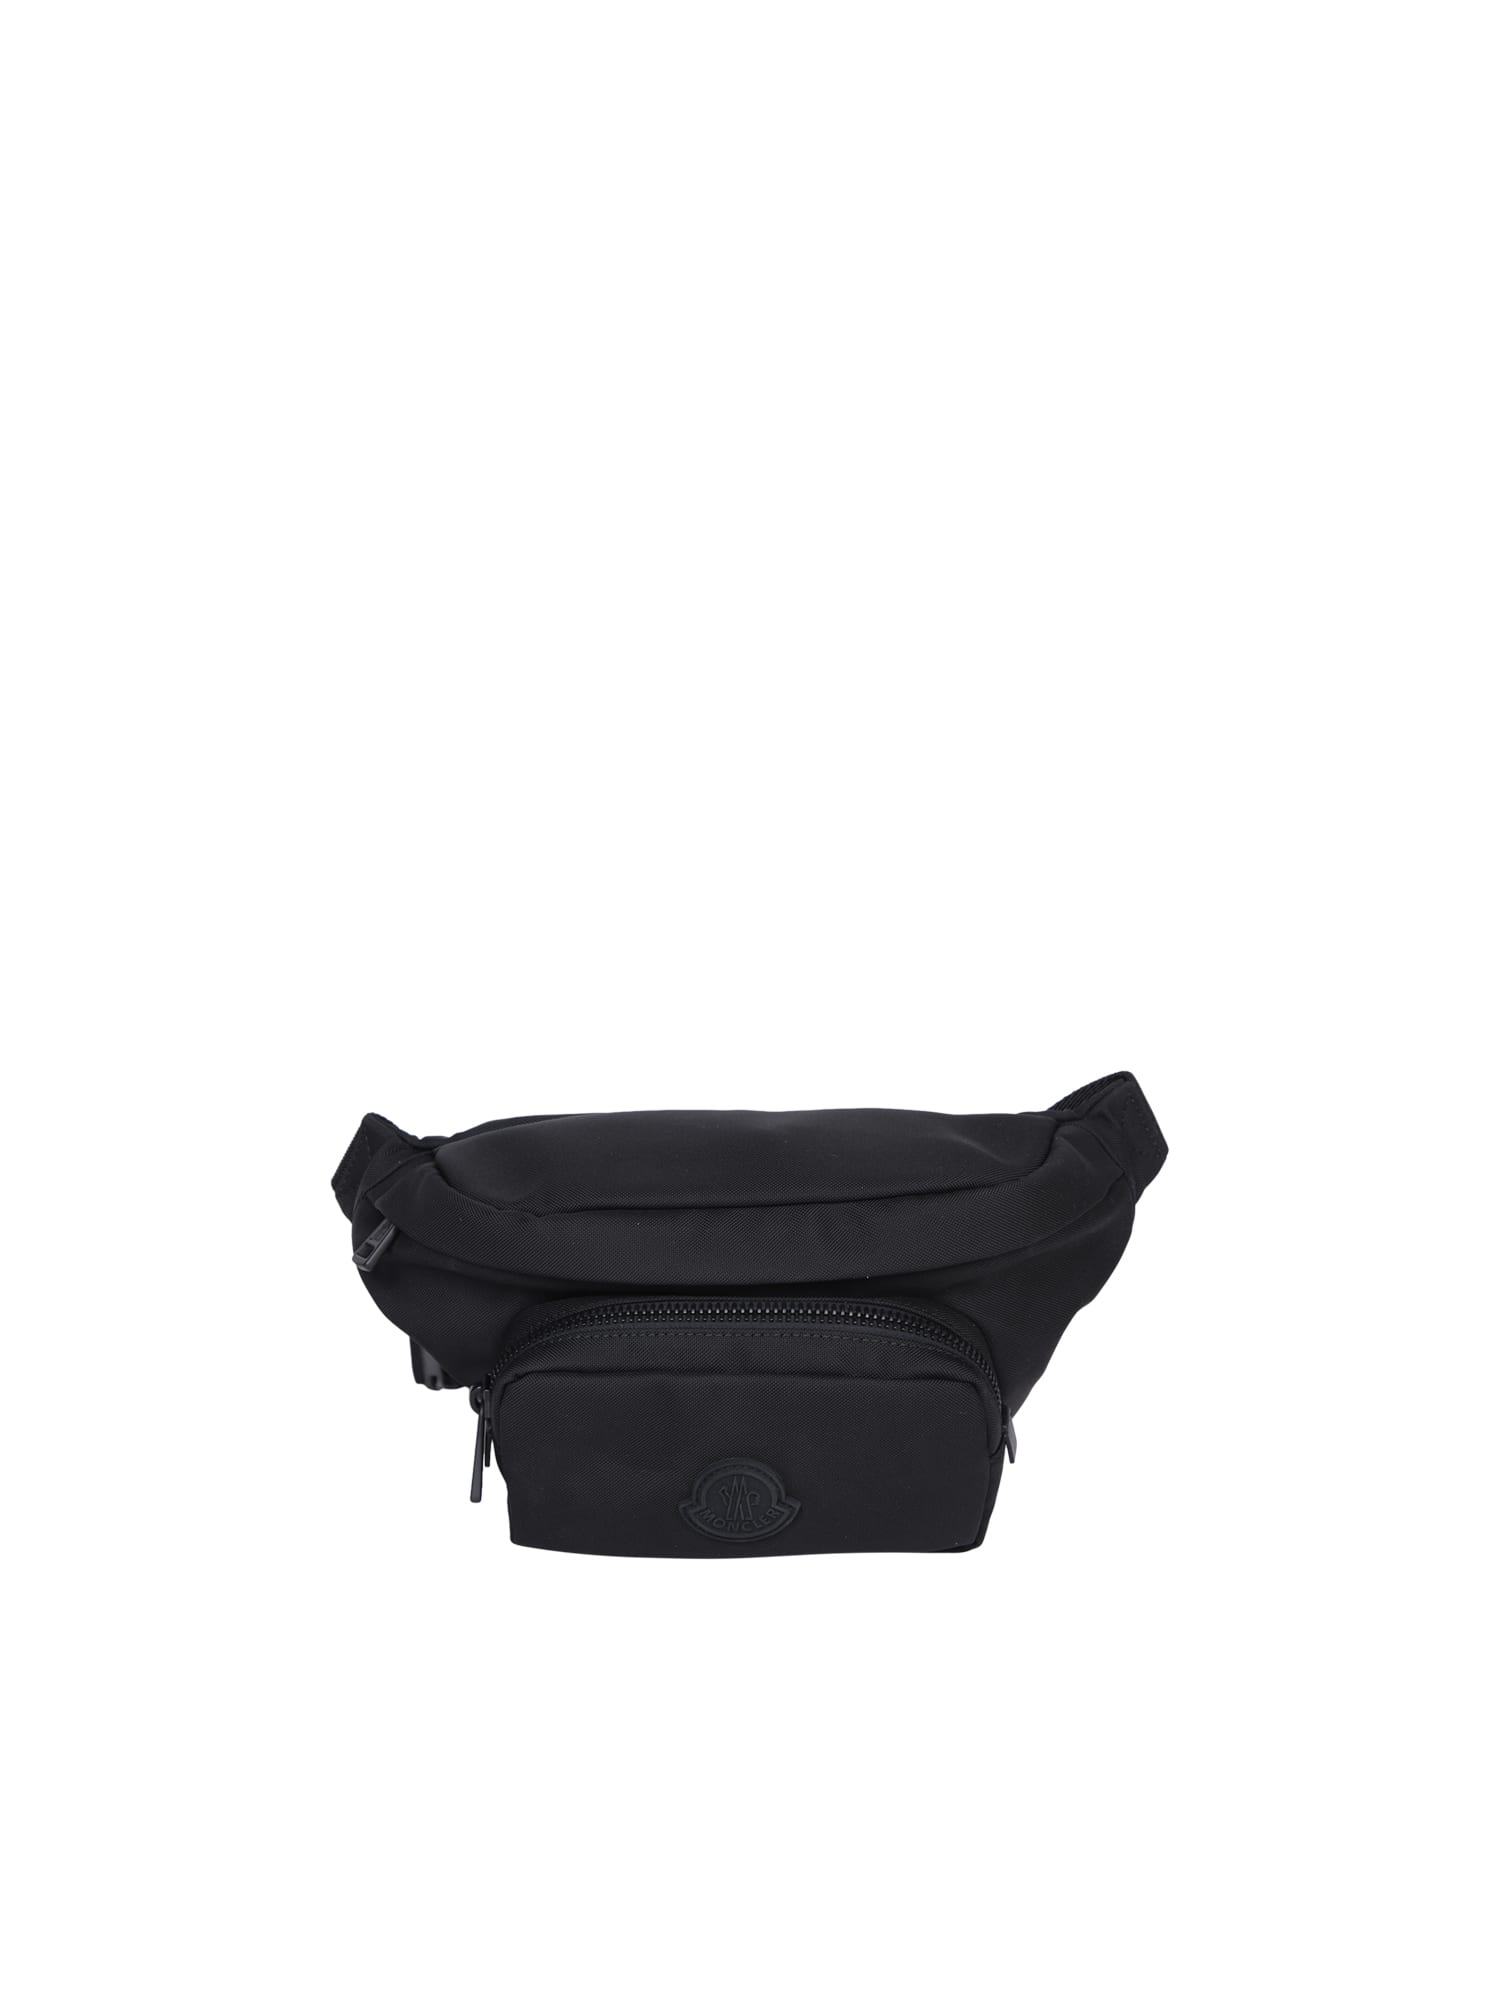 Durance Fanny Pack